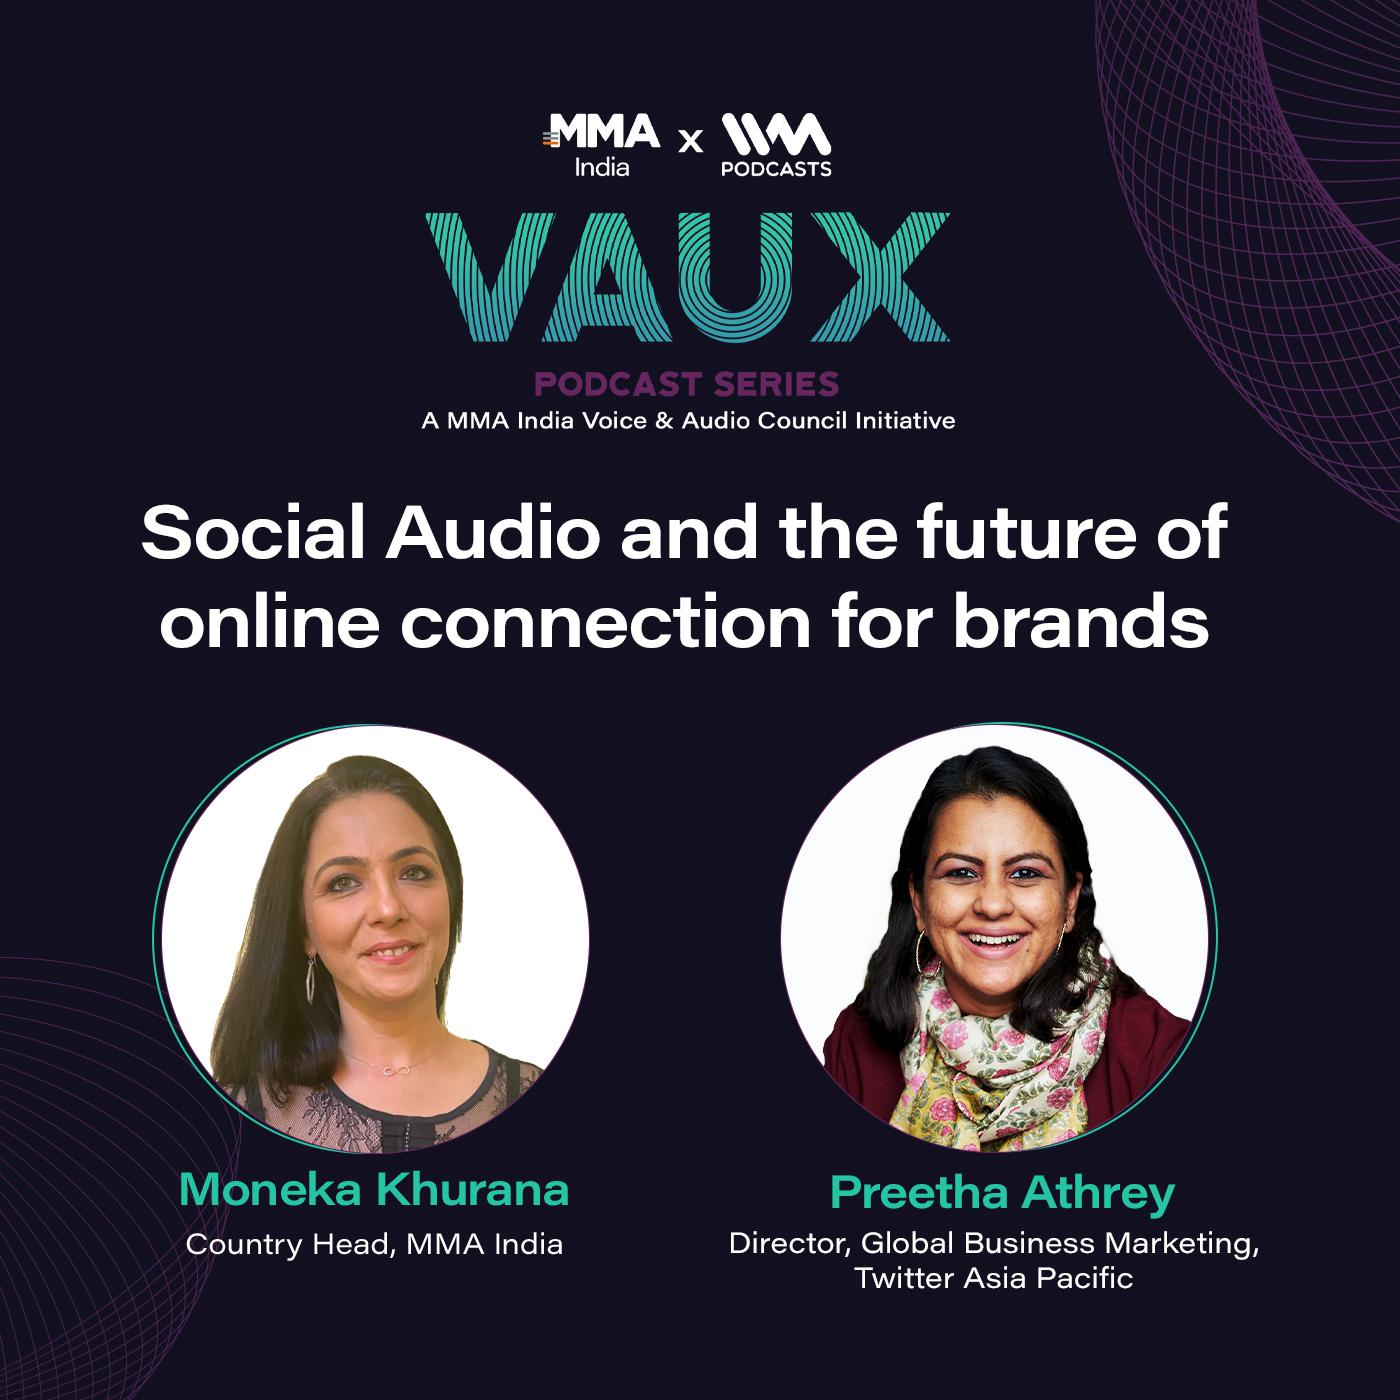 Social Audio and the future of online connection for brands